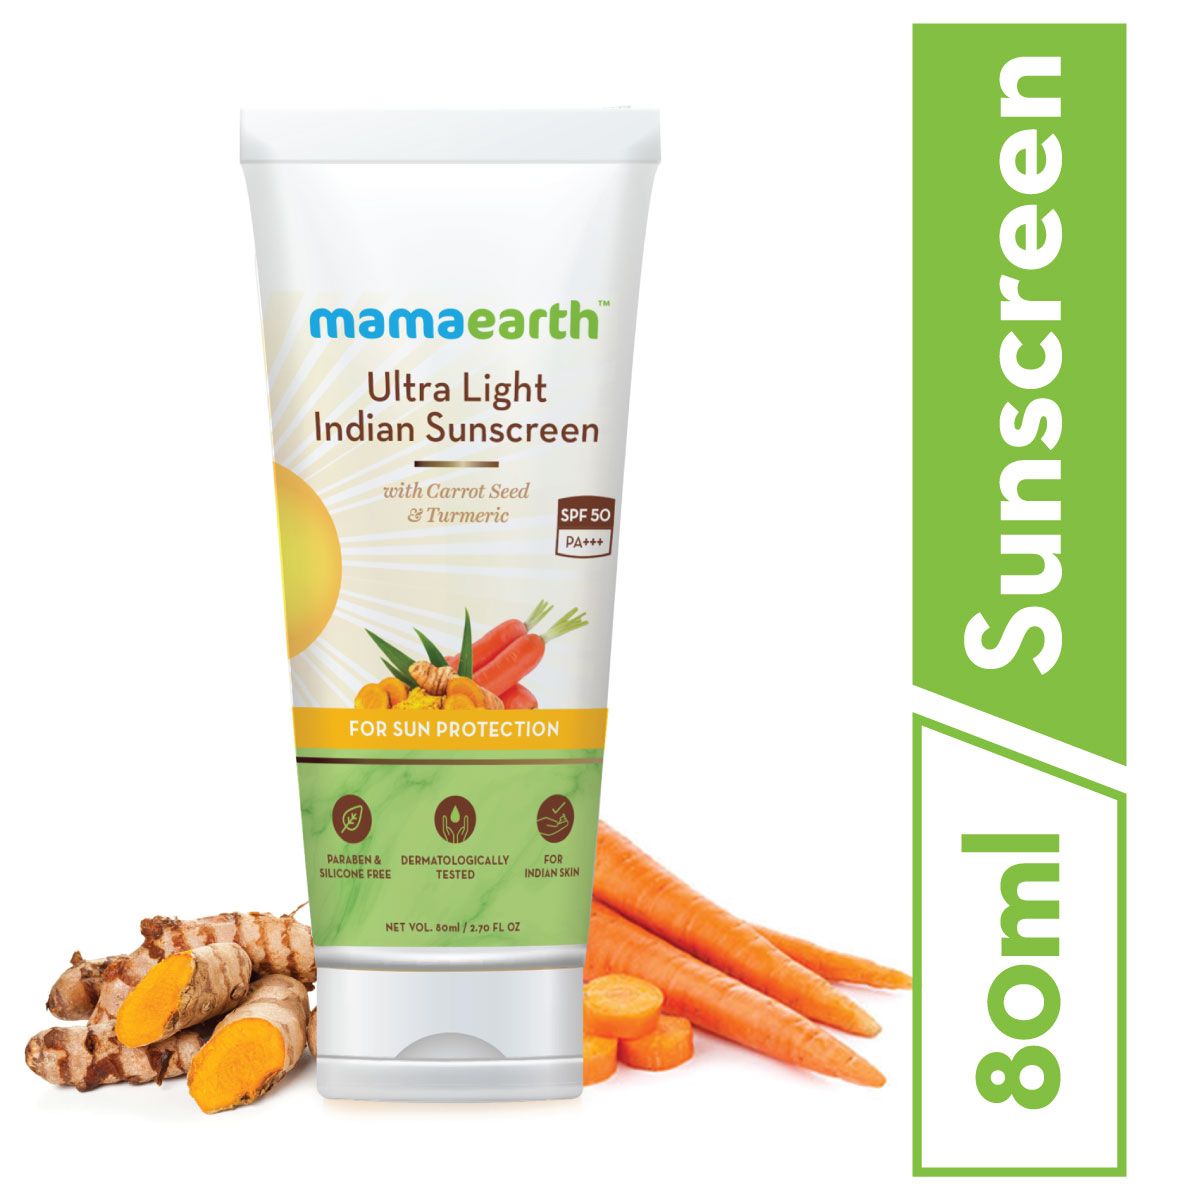 Mamaearth Ultra Light Indian Sunscreen Better Than Others Available In The Market